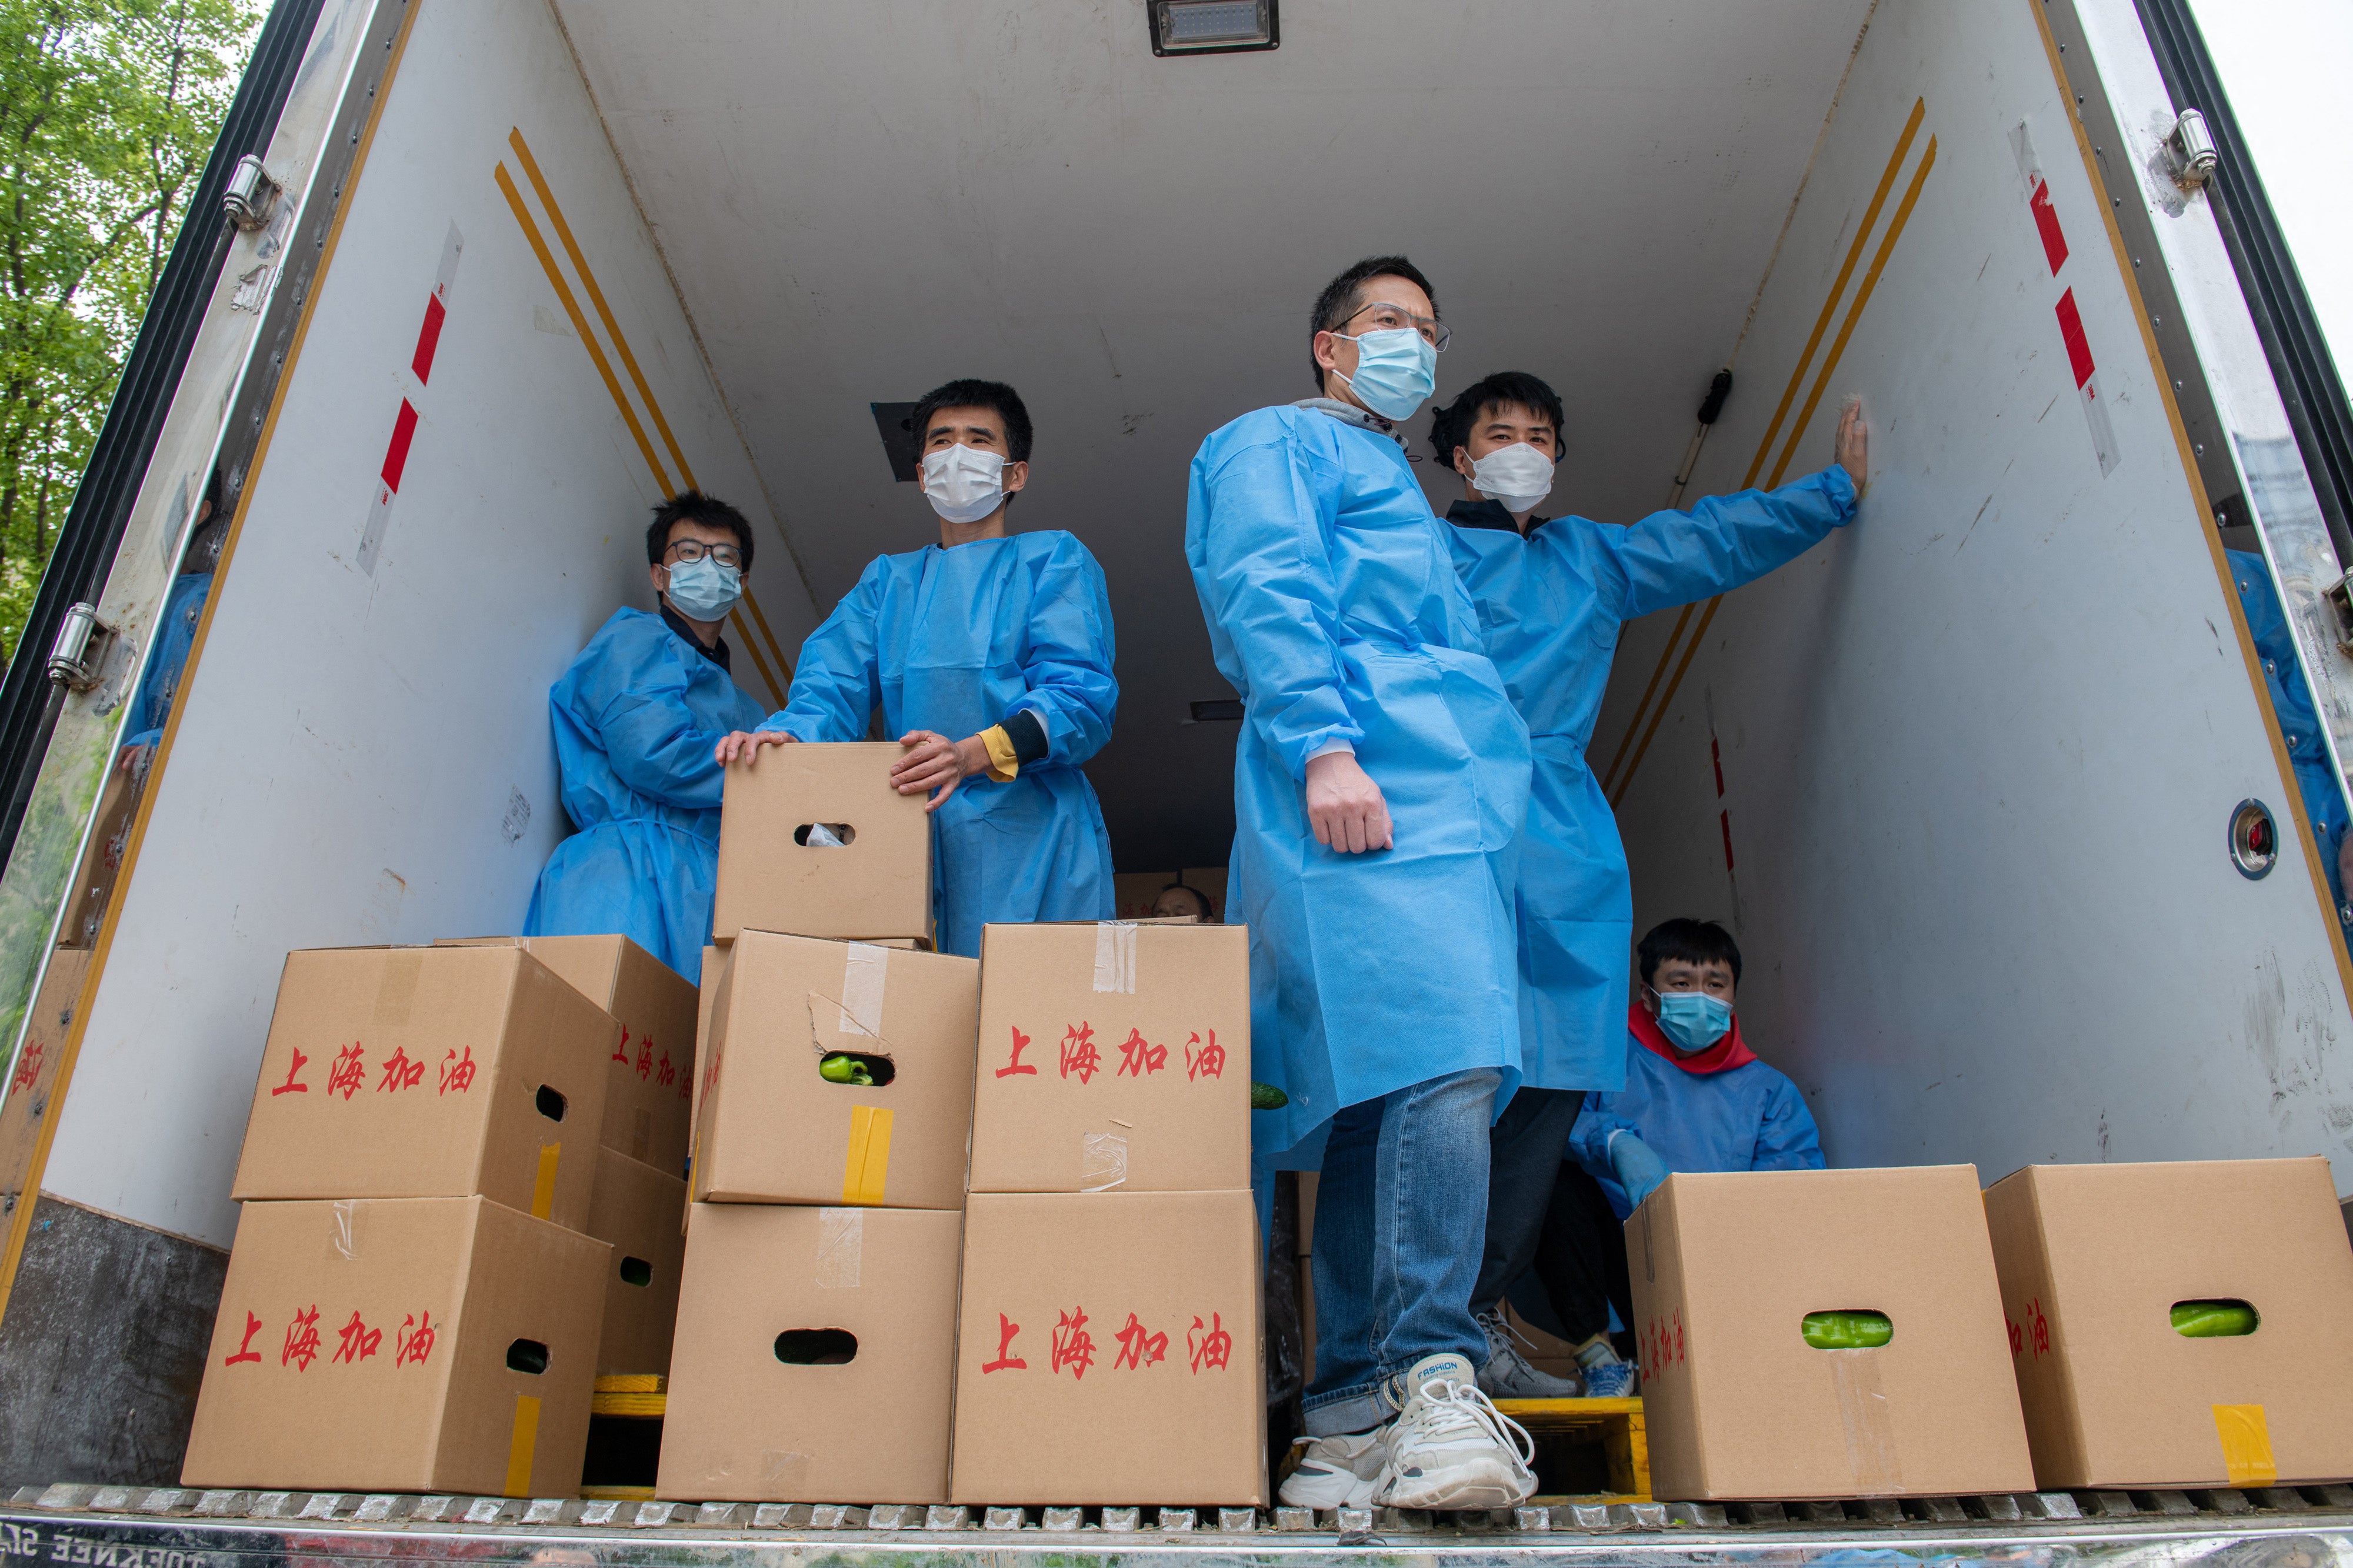 Community volunteers prepare to deliver boxes of food which are distributed by local government to residents in Pudong district in Shanghai on April 15, 2022